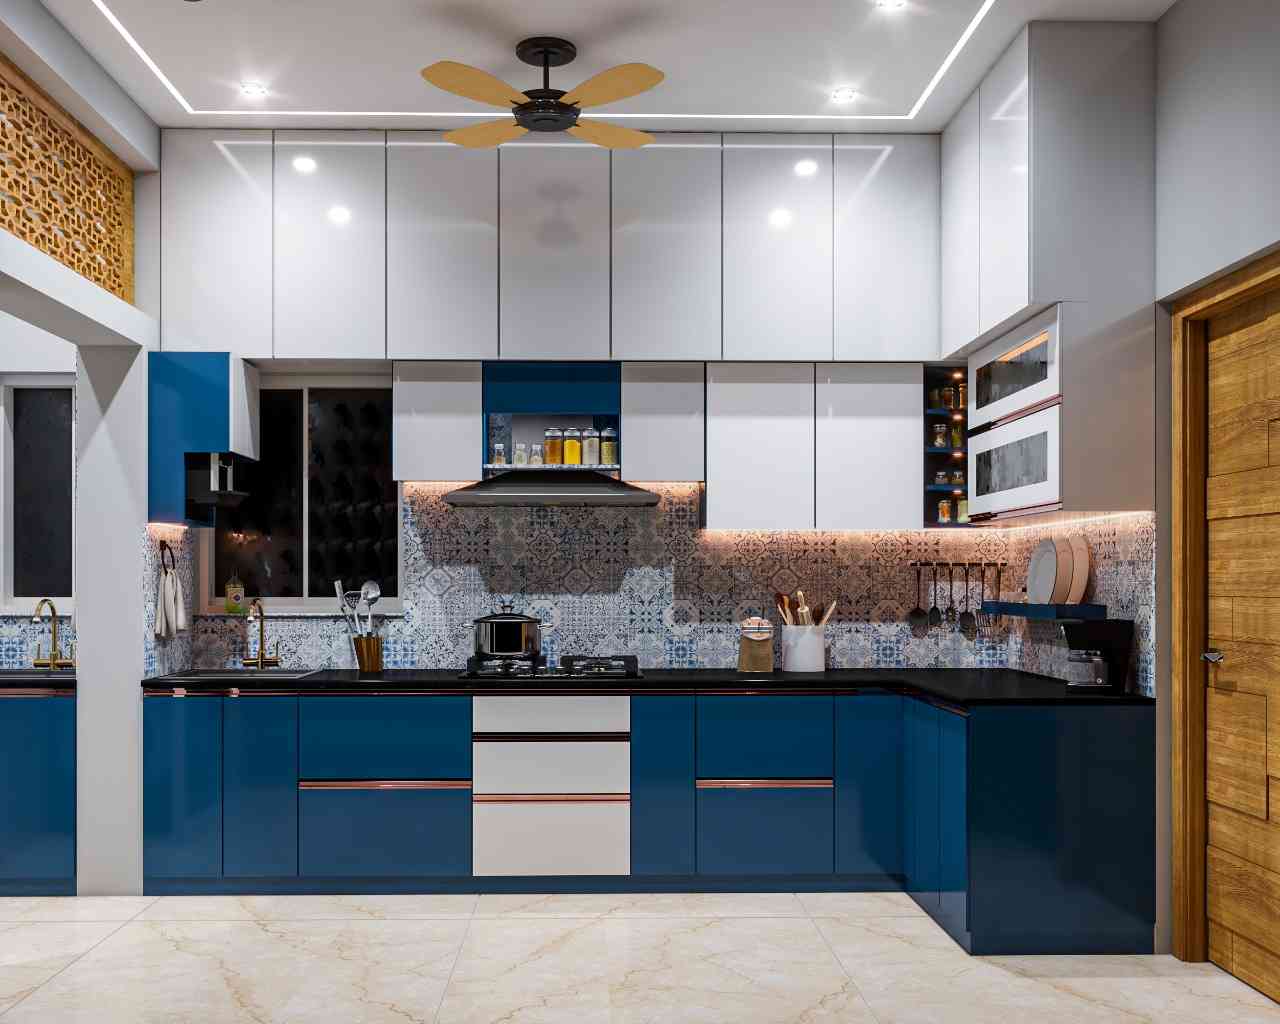 Modern L-Shaped Kitchen Design With Blue And Grey Kitchen Cabinets